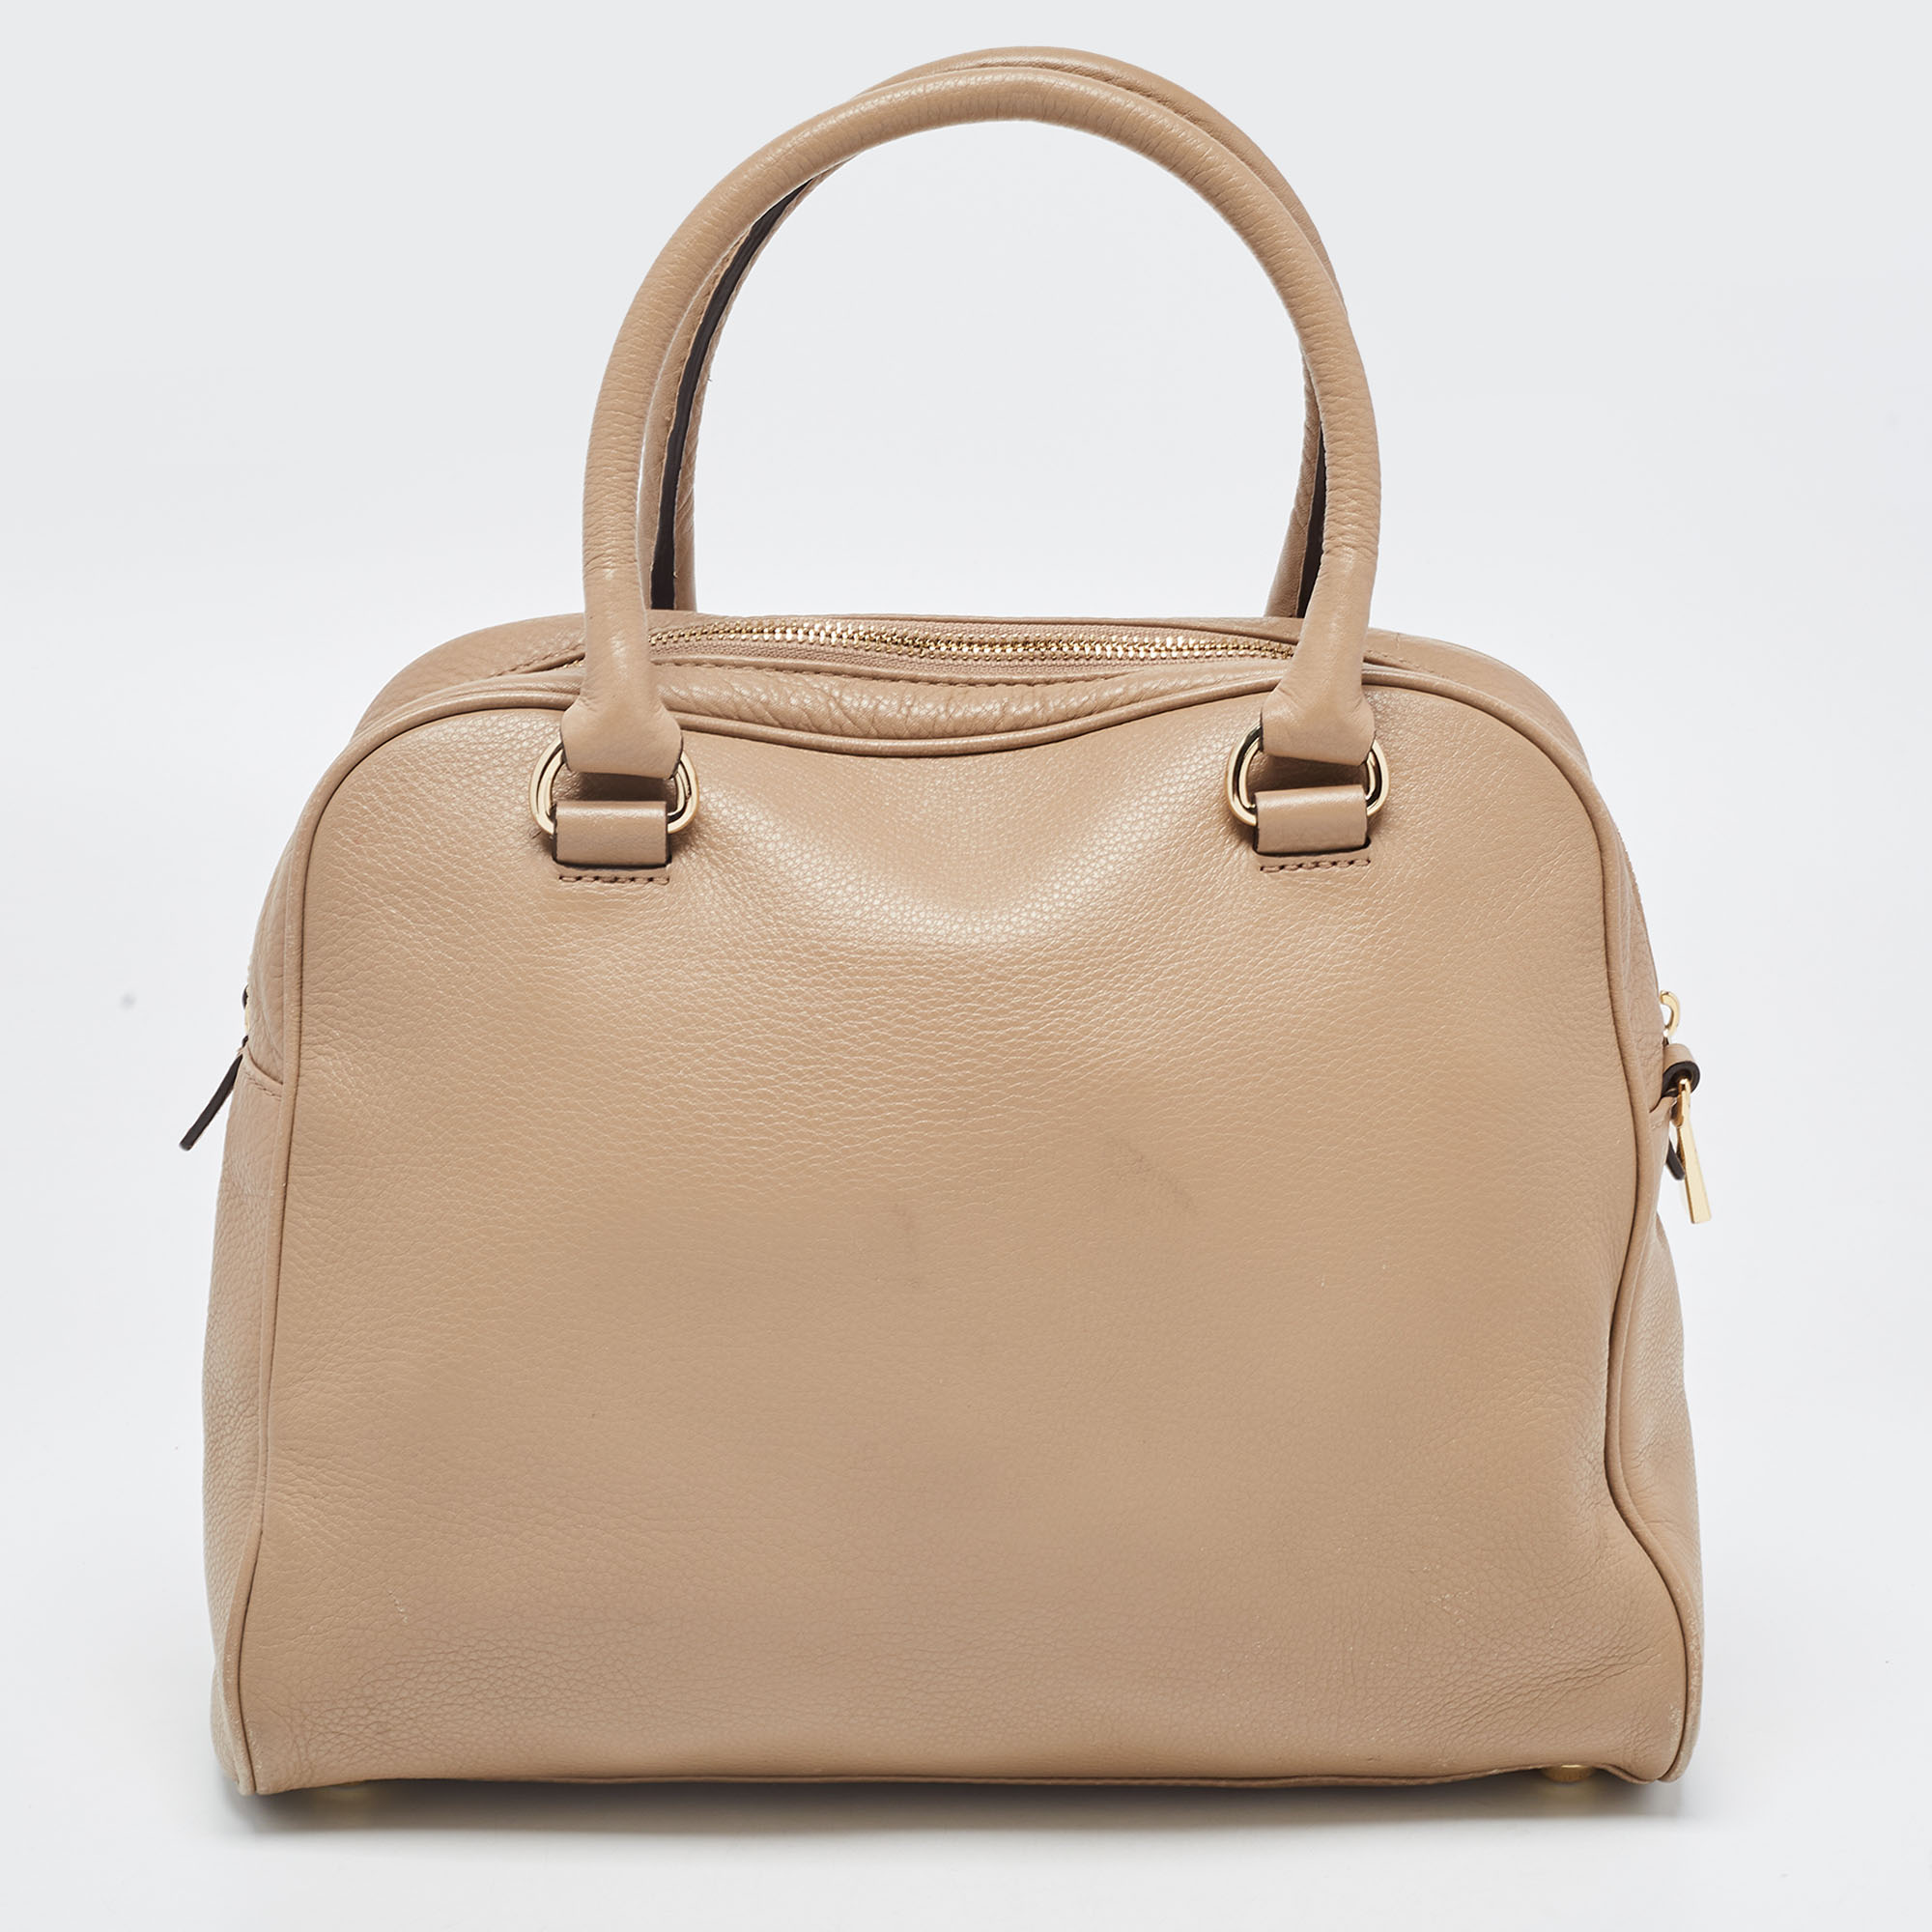 MICHAEL Micheal Kors Beige Leather Dome Satchel